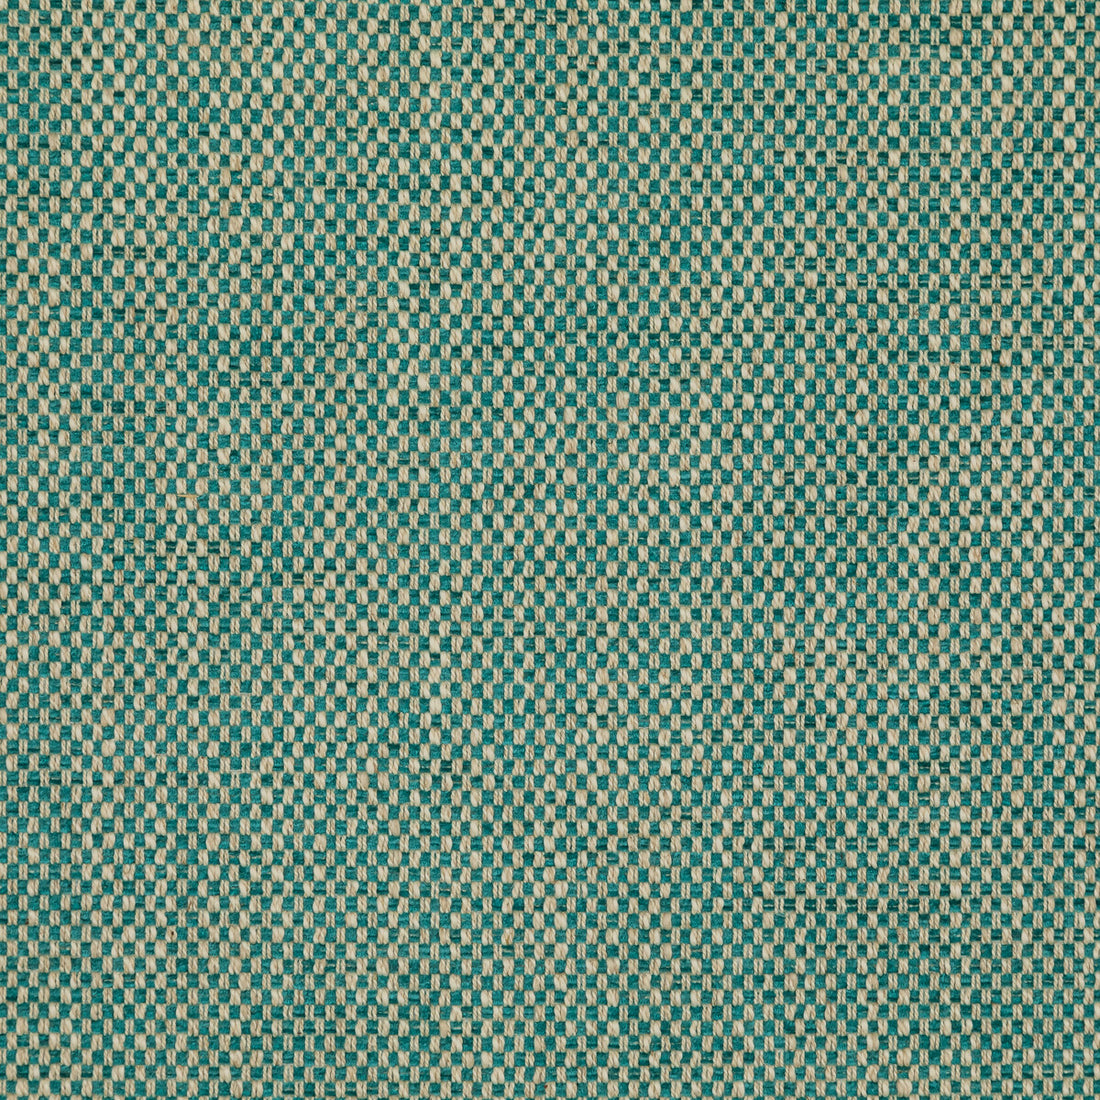 Carlton fabric in viridian color - pattern BFC-3692.355.0 - by Lee Jofa in the Blithfield collection